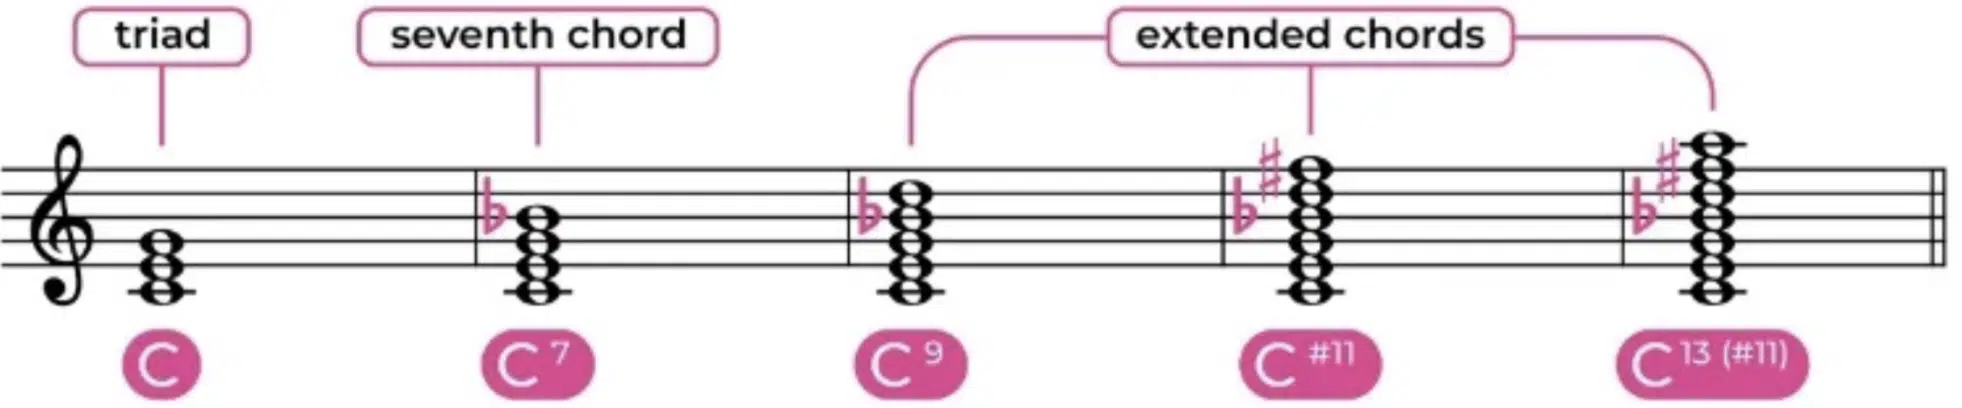 Extended Chords 3 - Unison